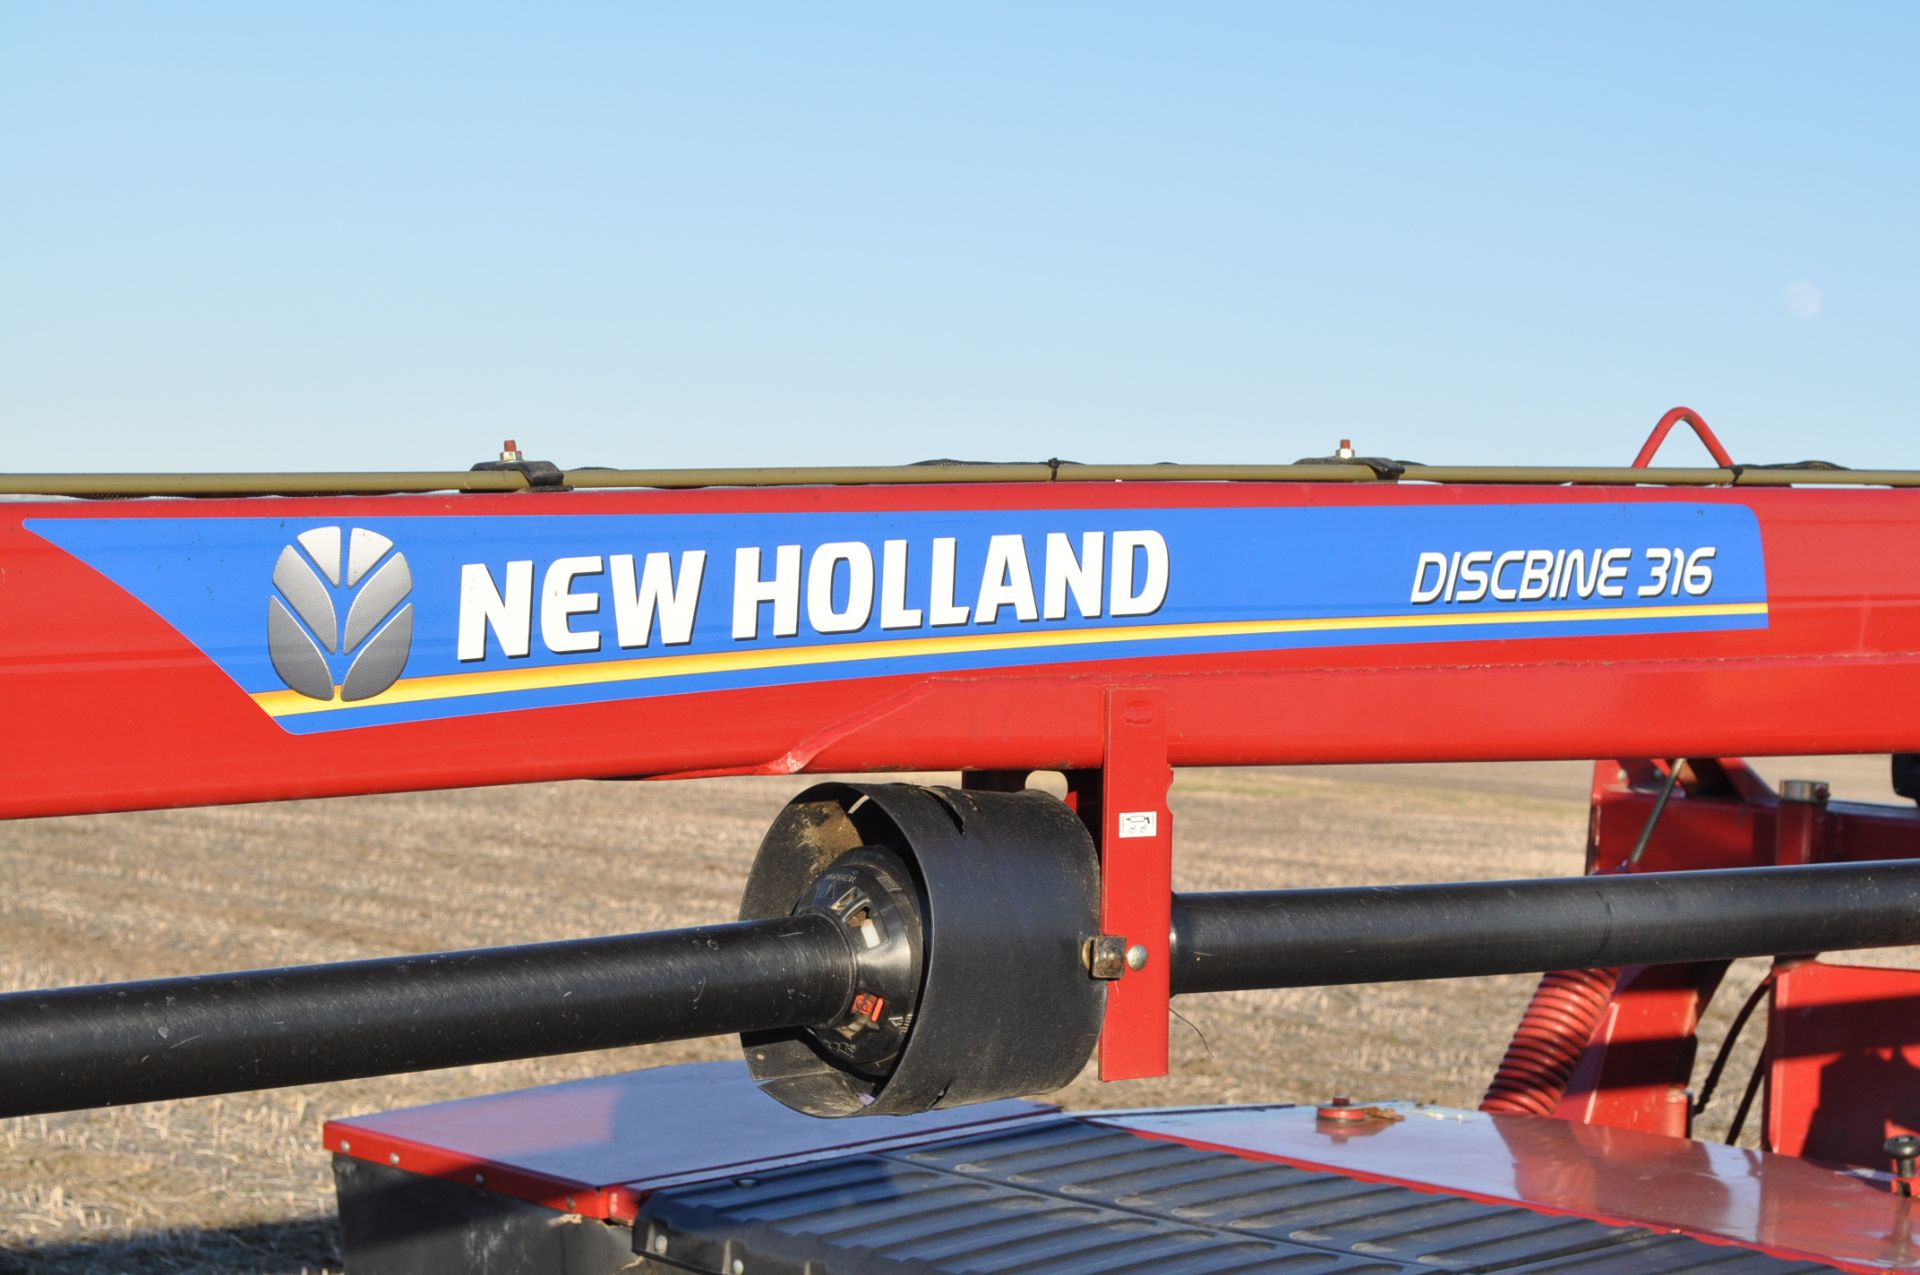 2014 New Holland 316 Mow Max II 16’ discbine, rubber on rubber rolls, center pivot, drawbar hitch, - Image 7 of 18